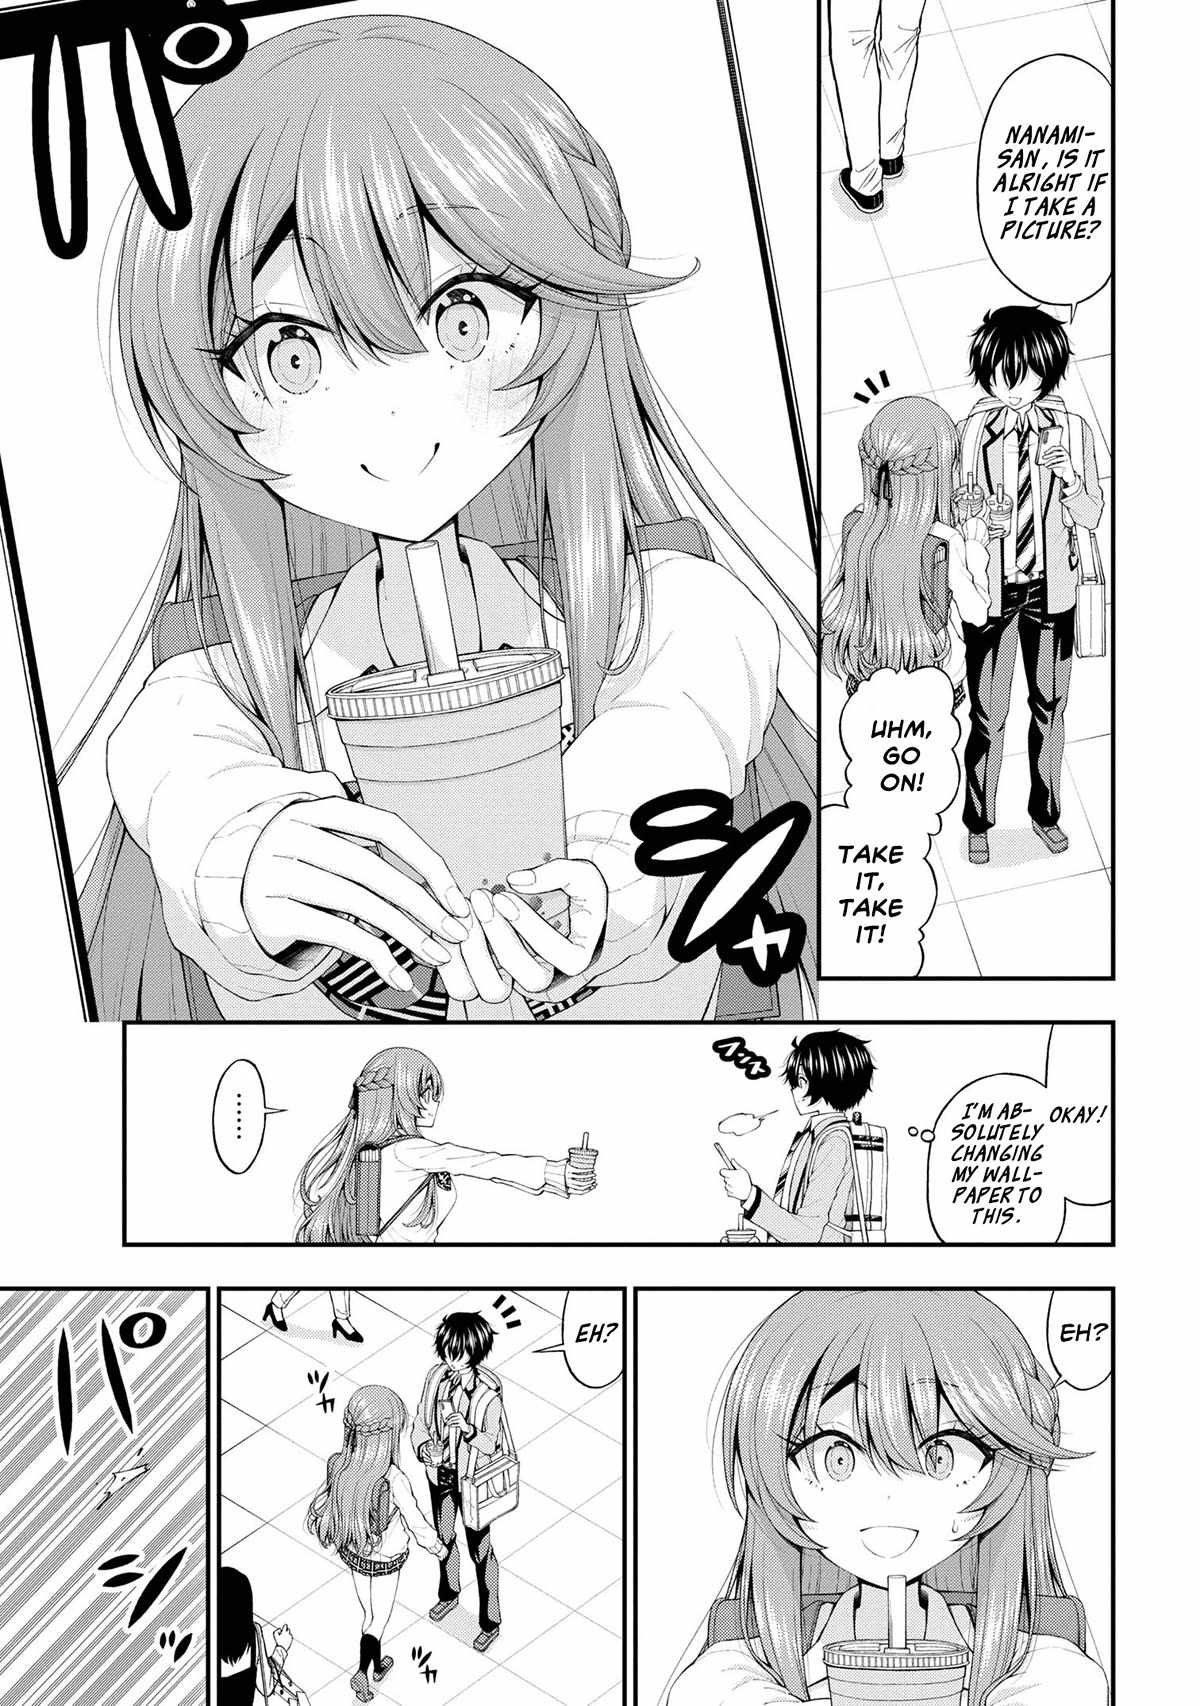 The Gal Who Was Meant to Confess to Me as a Game Punishment Has Apparently Fallen in Love with Me Chapter 14-eng-li - Page 4